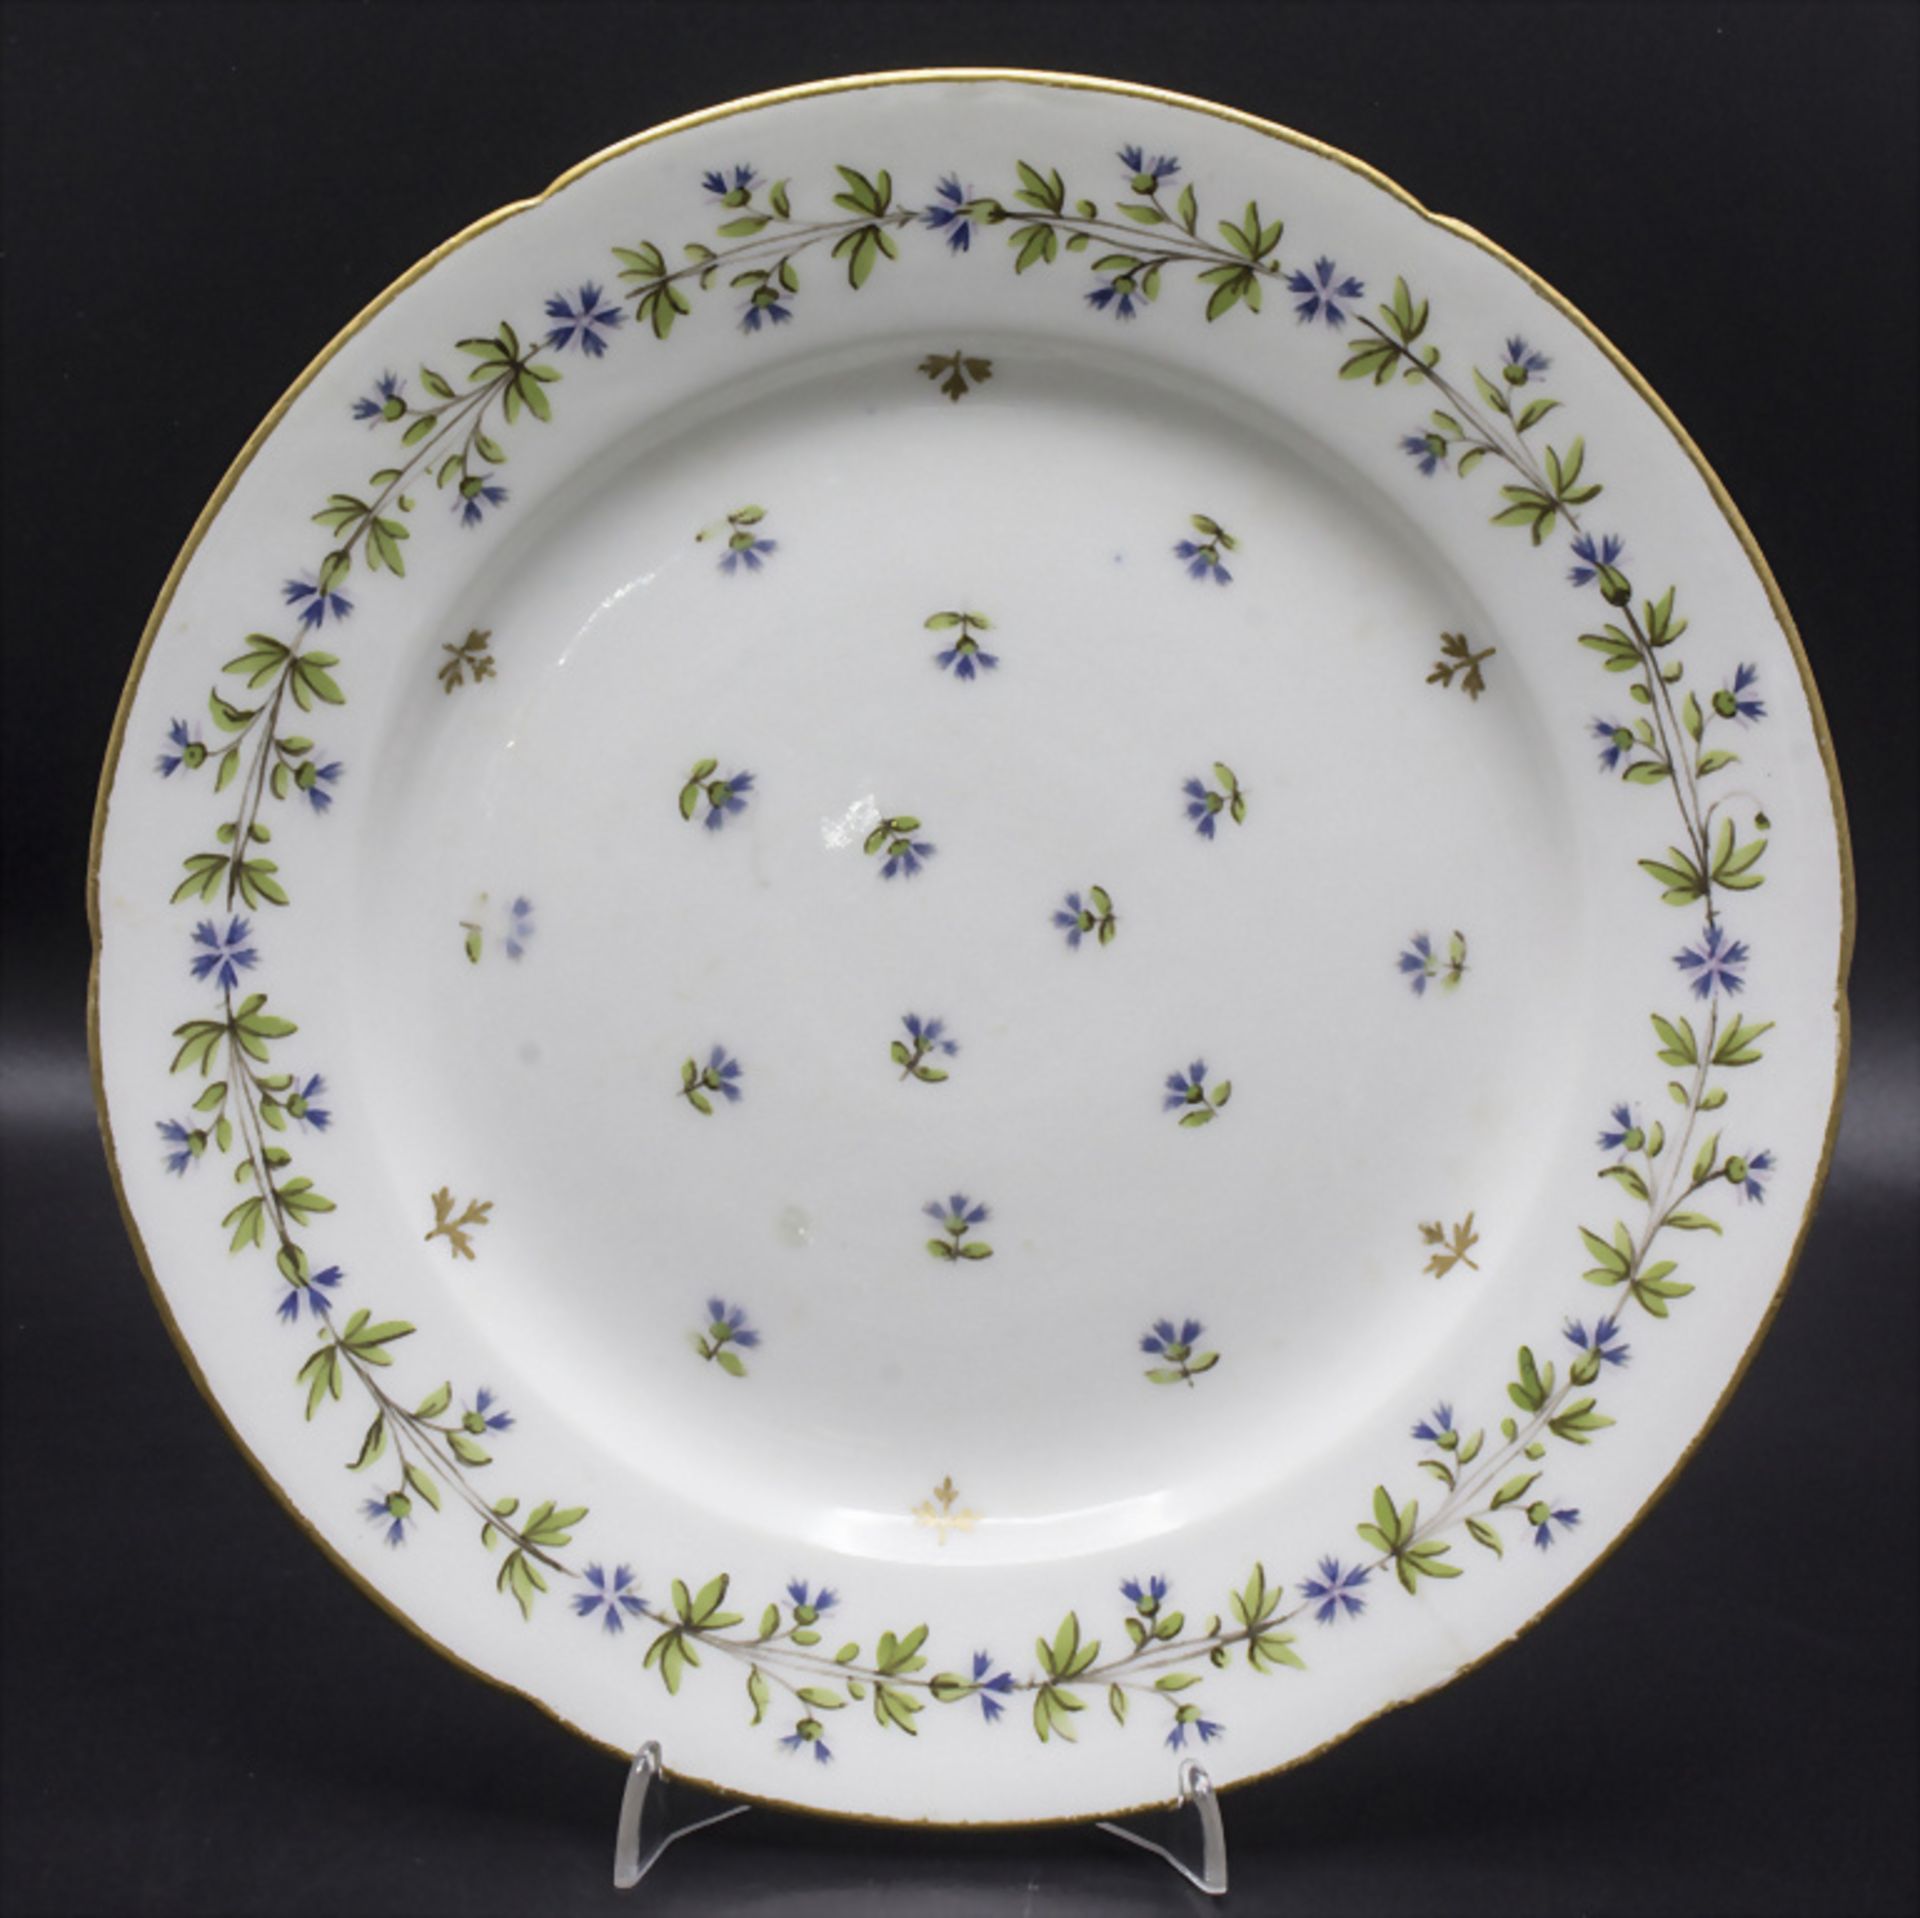 Teller mit Blumenmalerei / A plate with flowers, wohl Paris, 18./19. Jh.